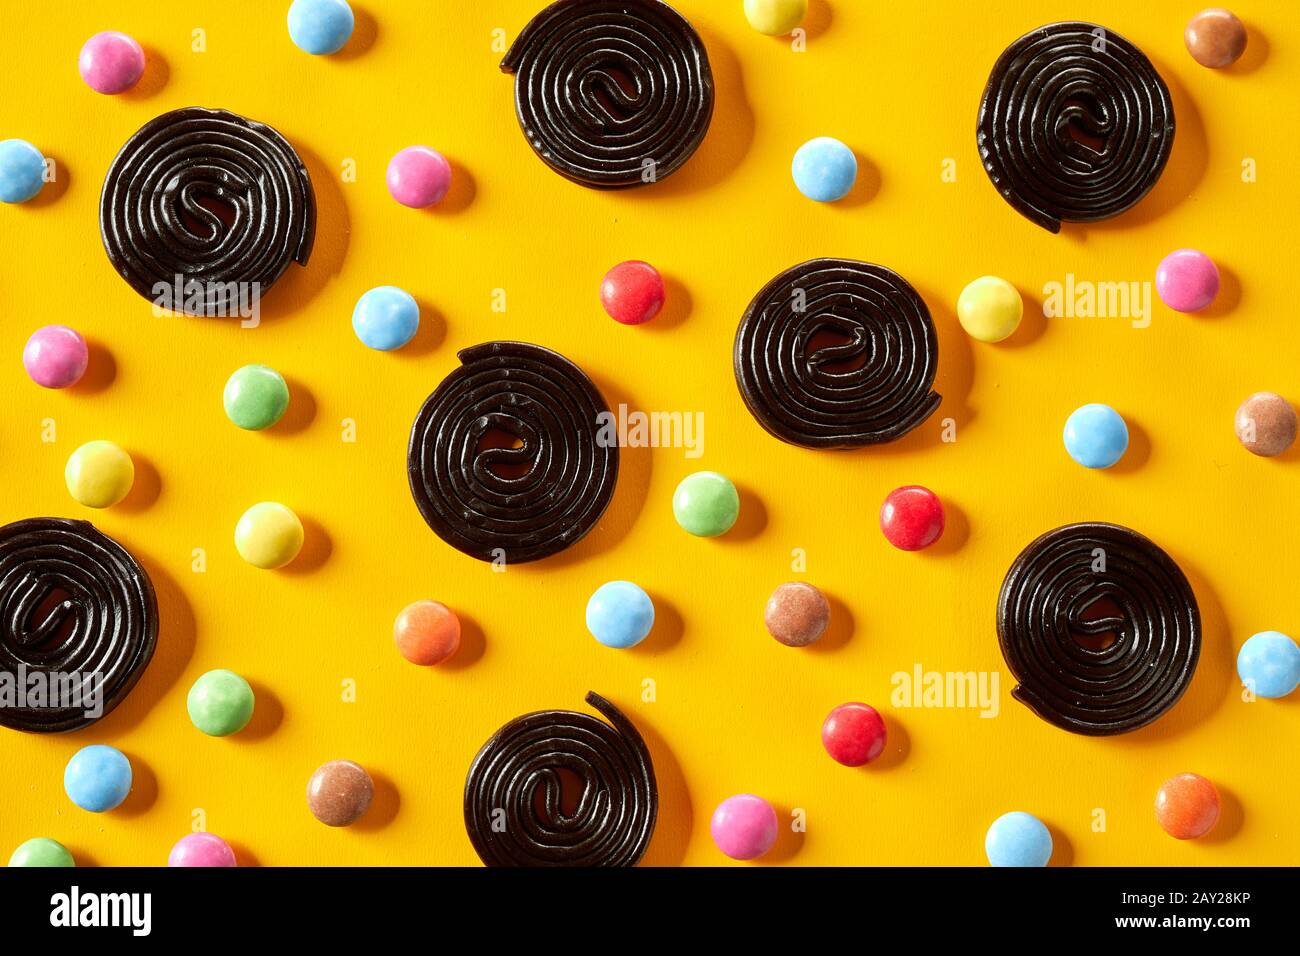 Coiled spirals of liquorice with sugar-coated chocolate candy on an exotic vibrant yellow background in a random pattern Stock Photo